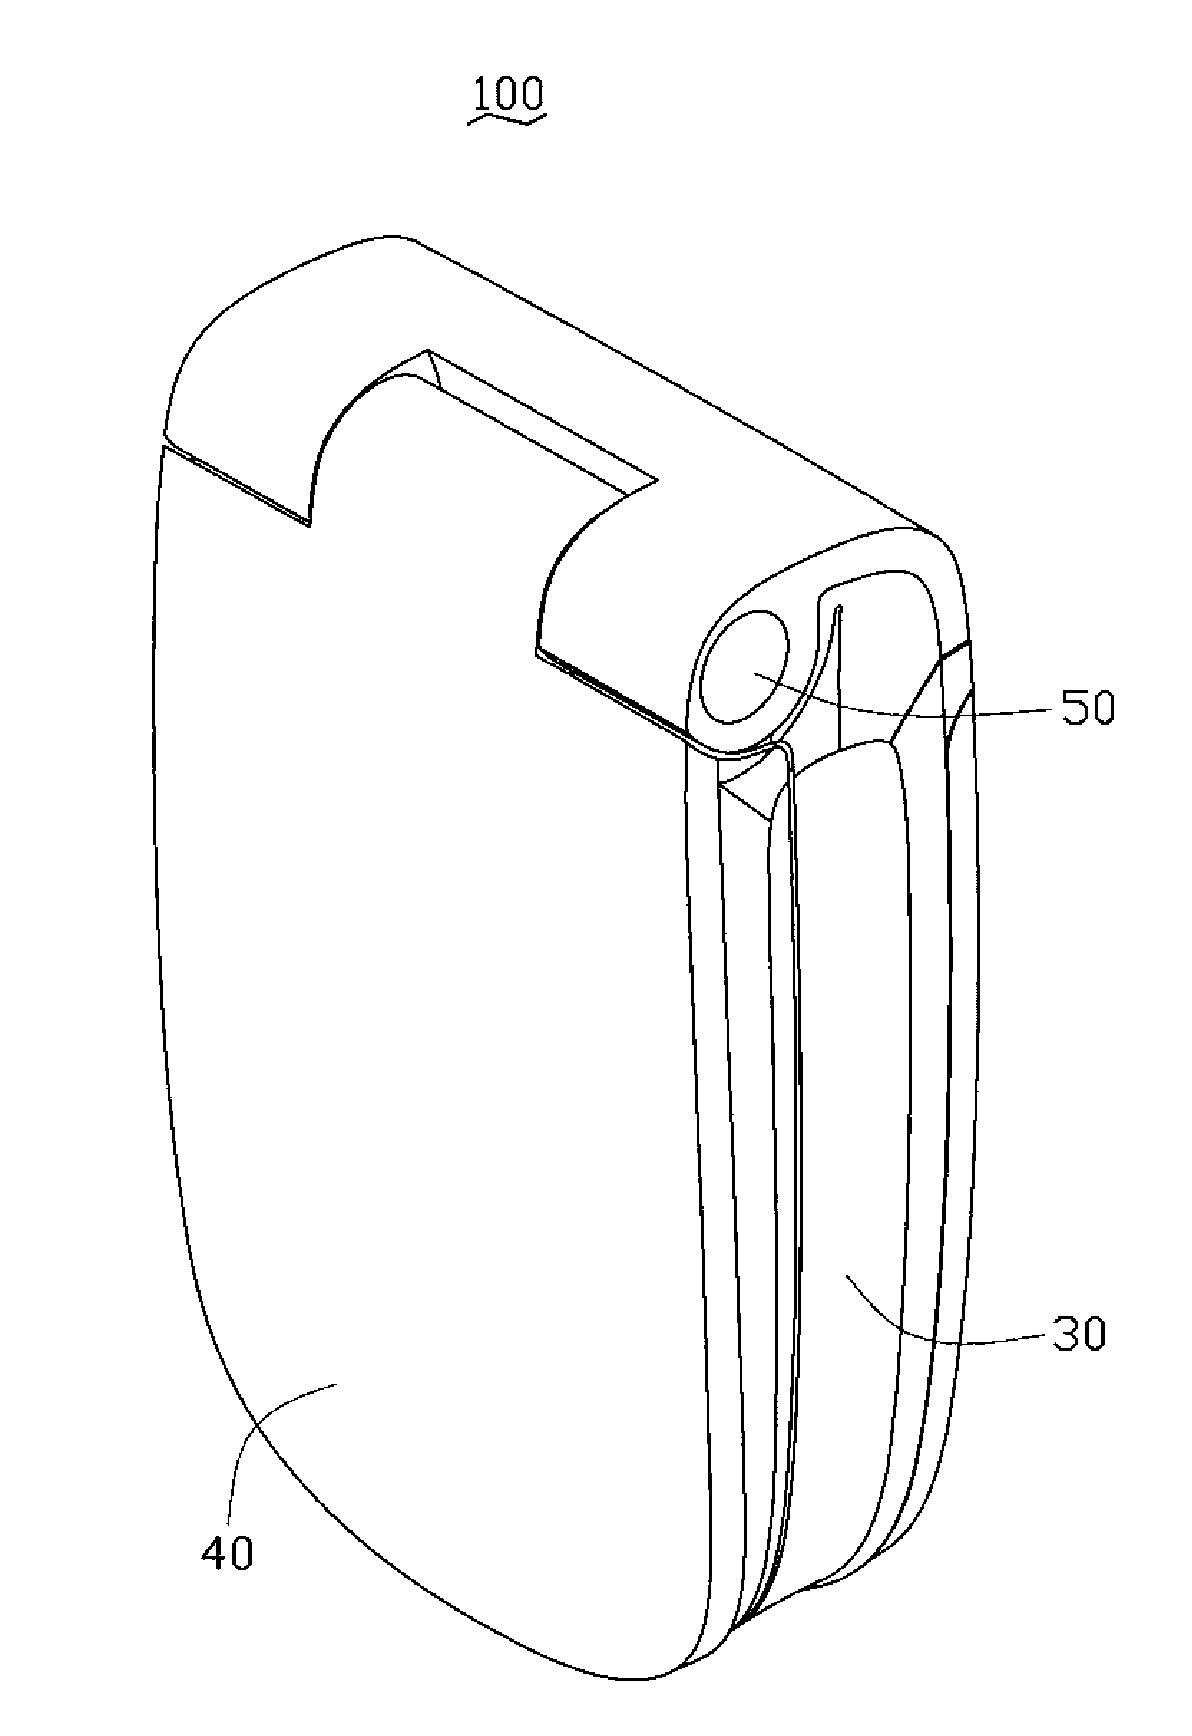 Hinge sleeve and portable electronic device using same